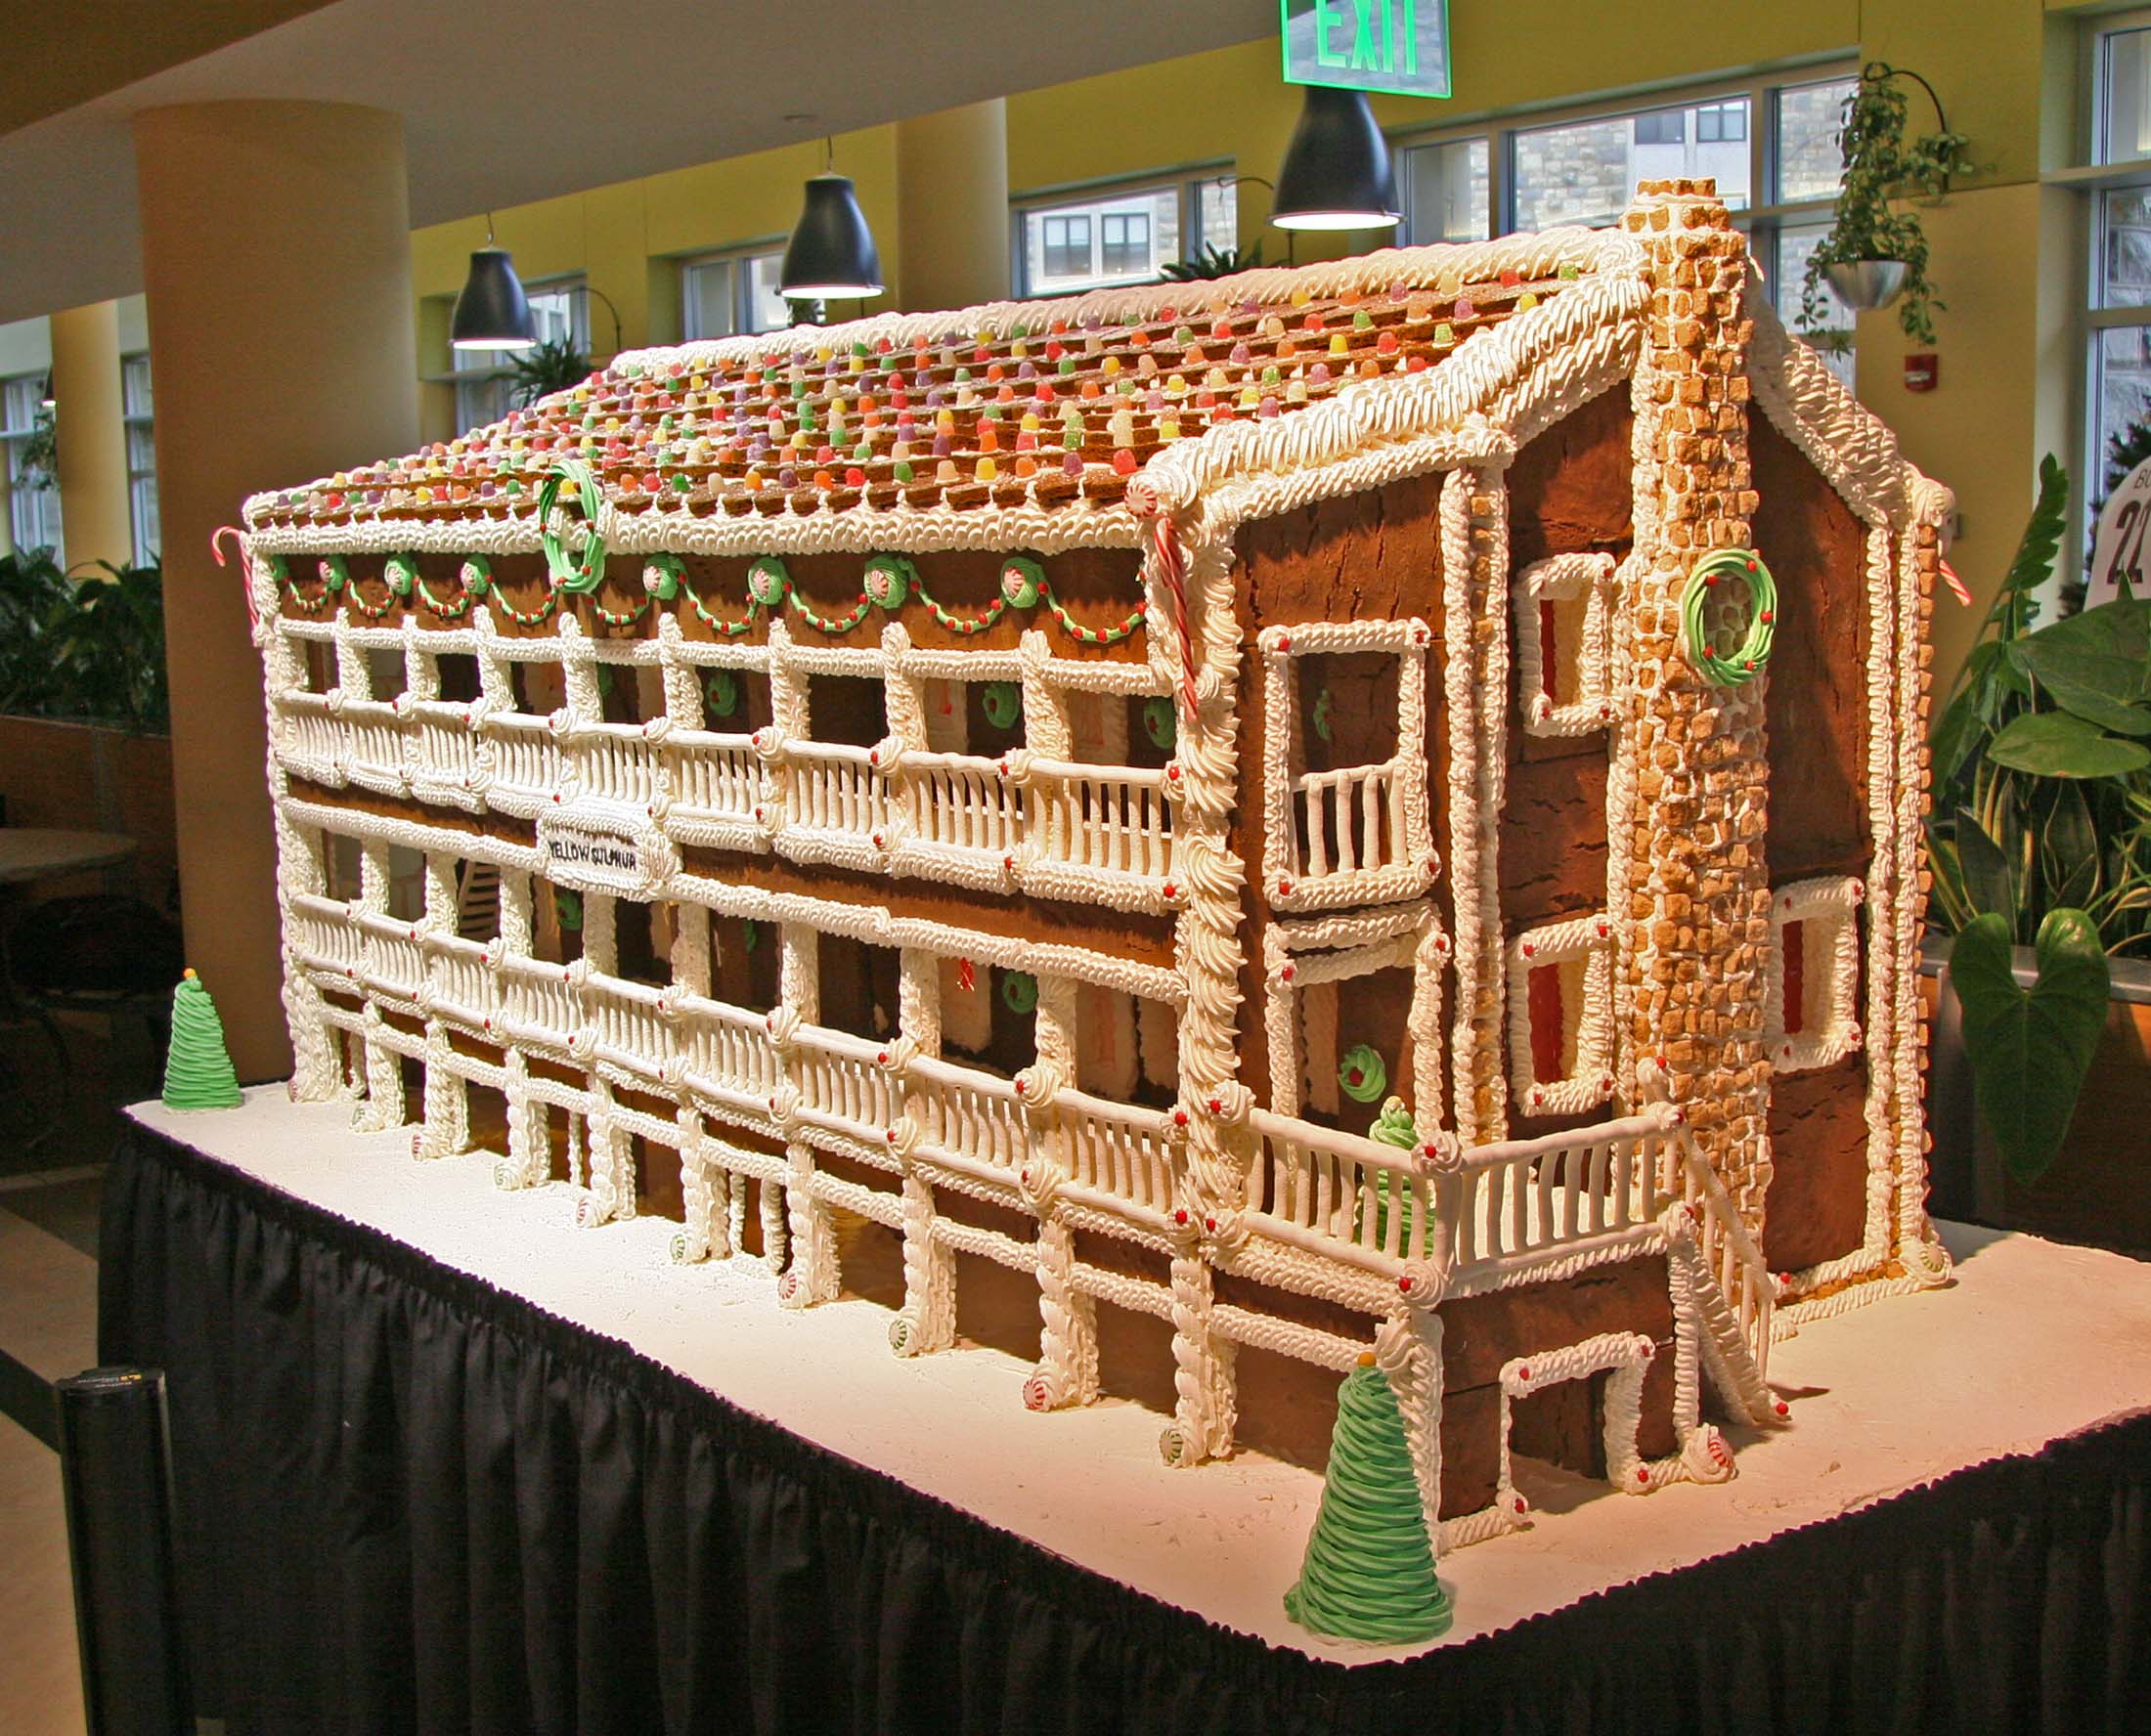 A full image of the front of the gingerbread hotel. It is a near replica of the Yellow Sulphur Springs inn.